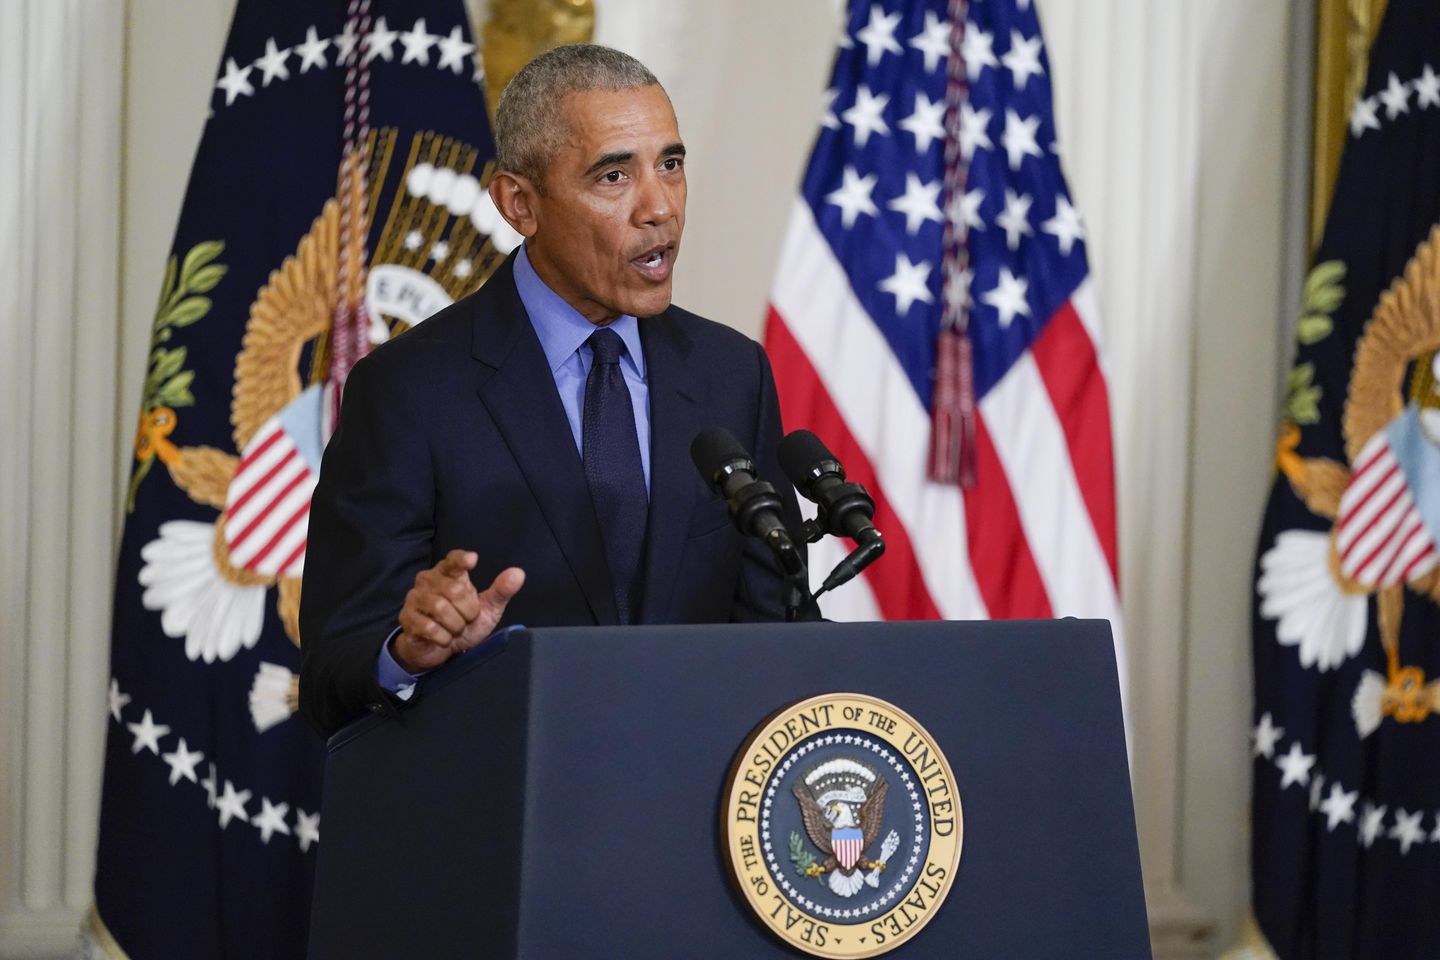 Obama: New social media curbs needed to protect democracy